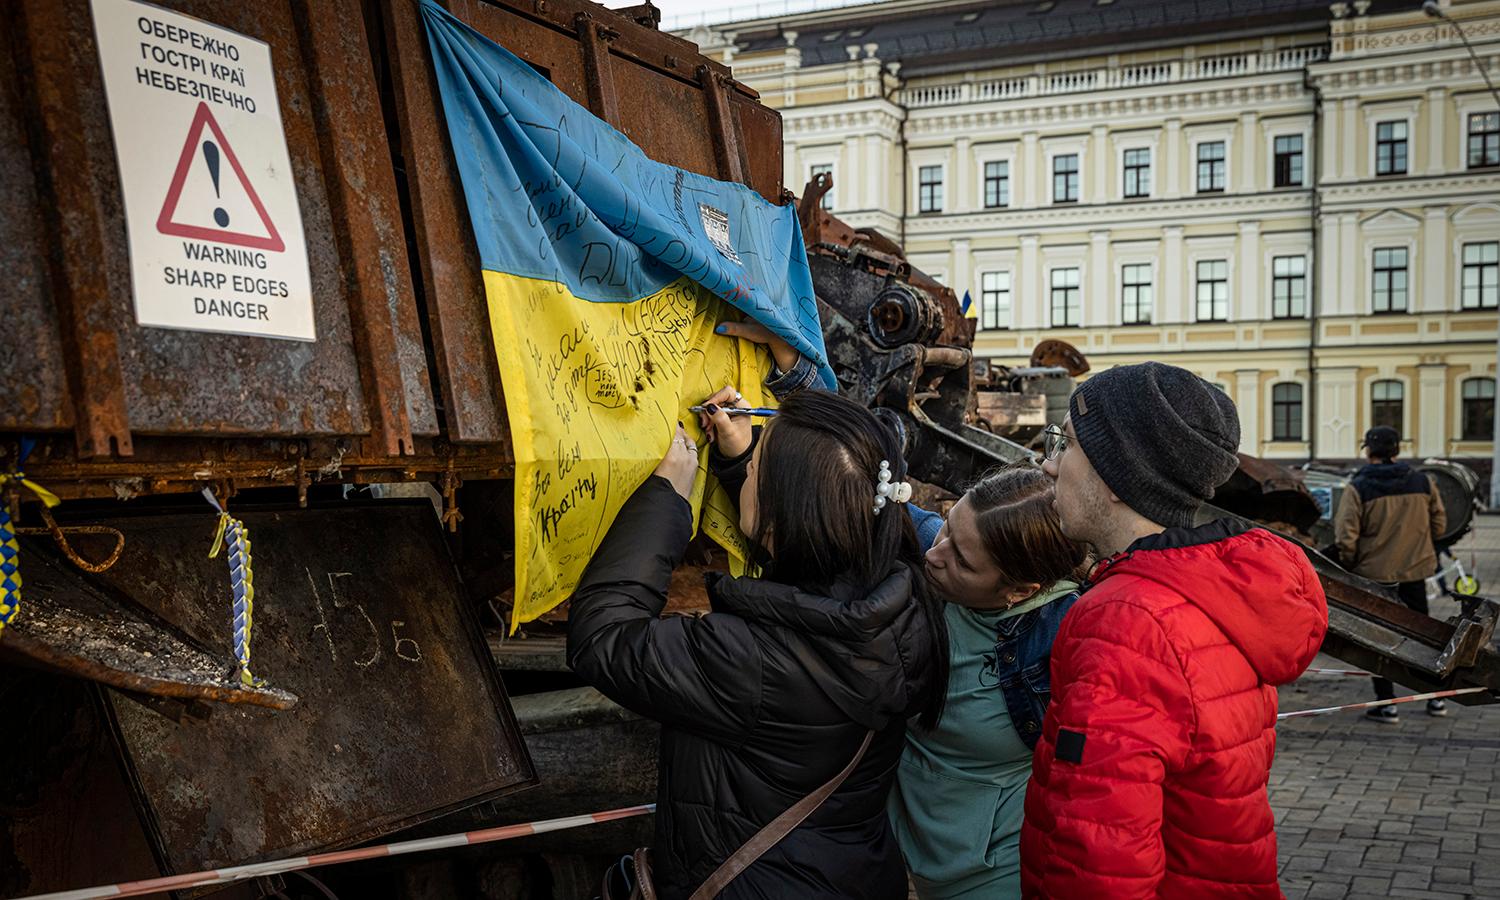 A girl writes one a Ukrainian flag as people look at an exhibition of tanks and military equipment on display.